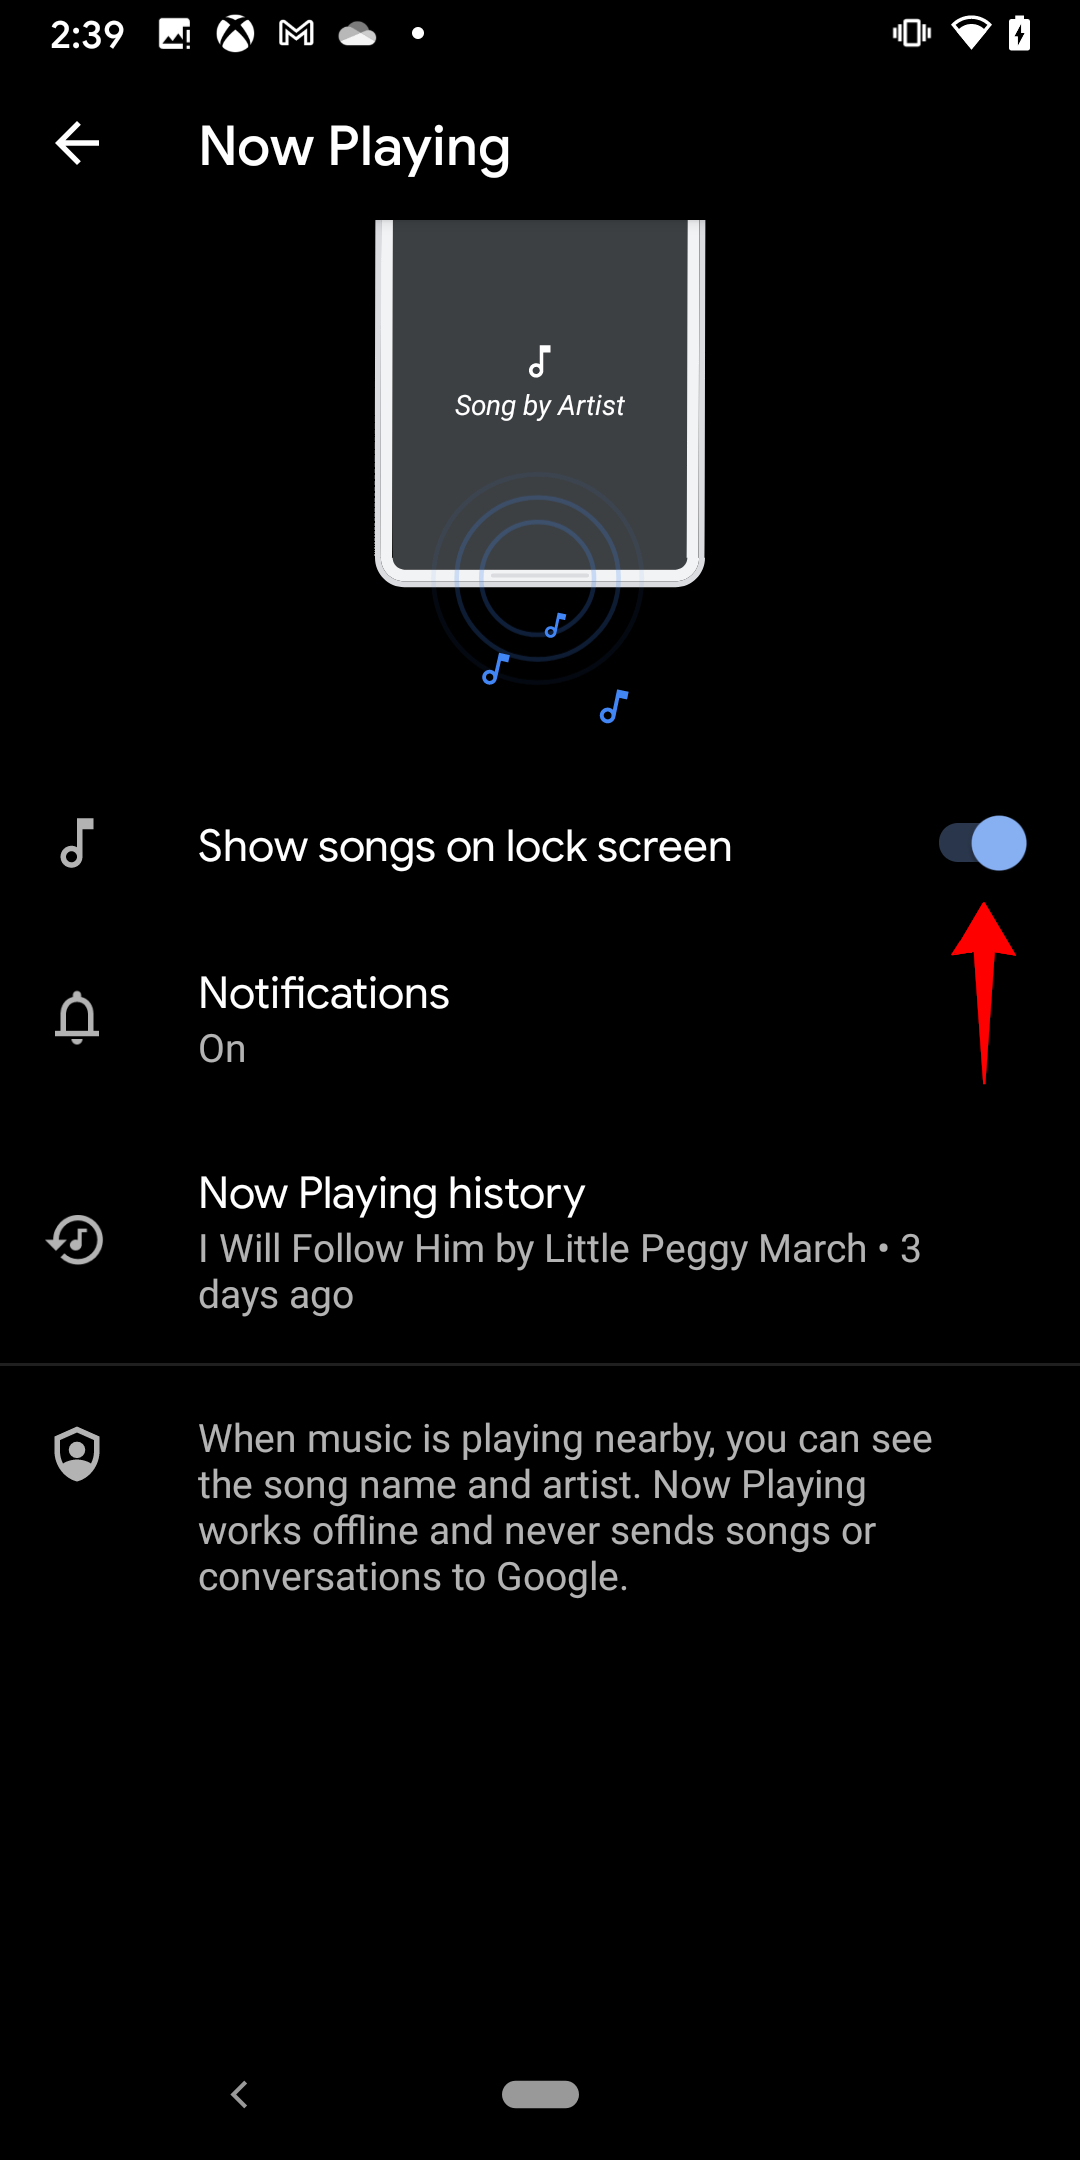 How to use Now Playing to identify songs on Google Pixel